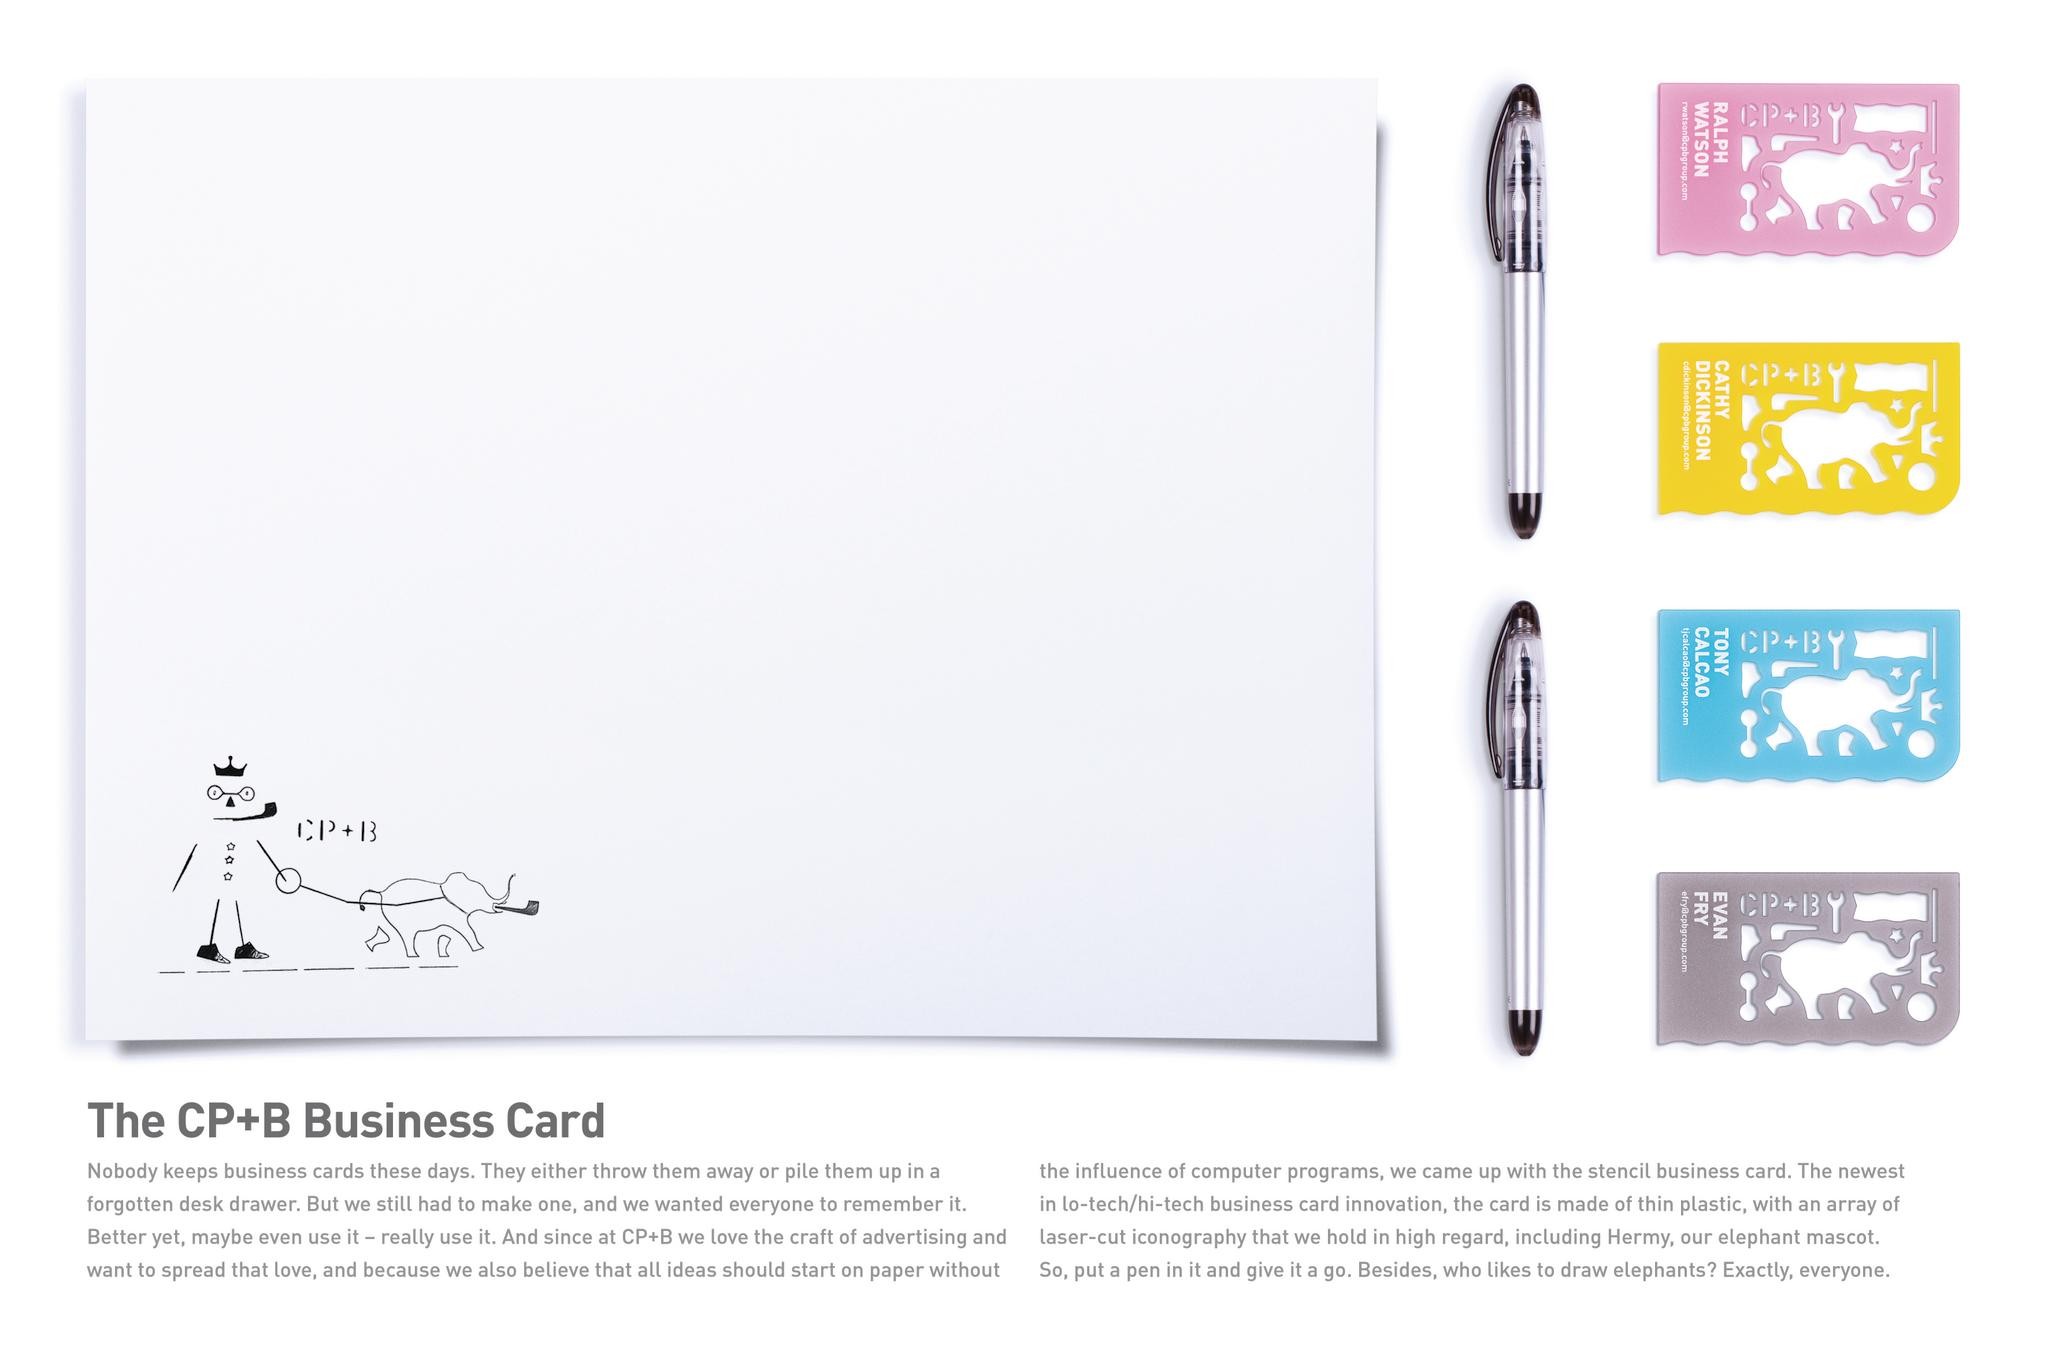 THE CP+B BUSINESS CARD